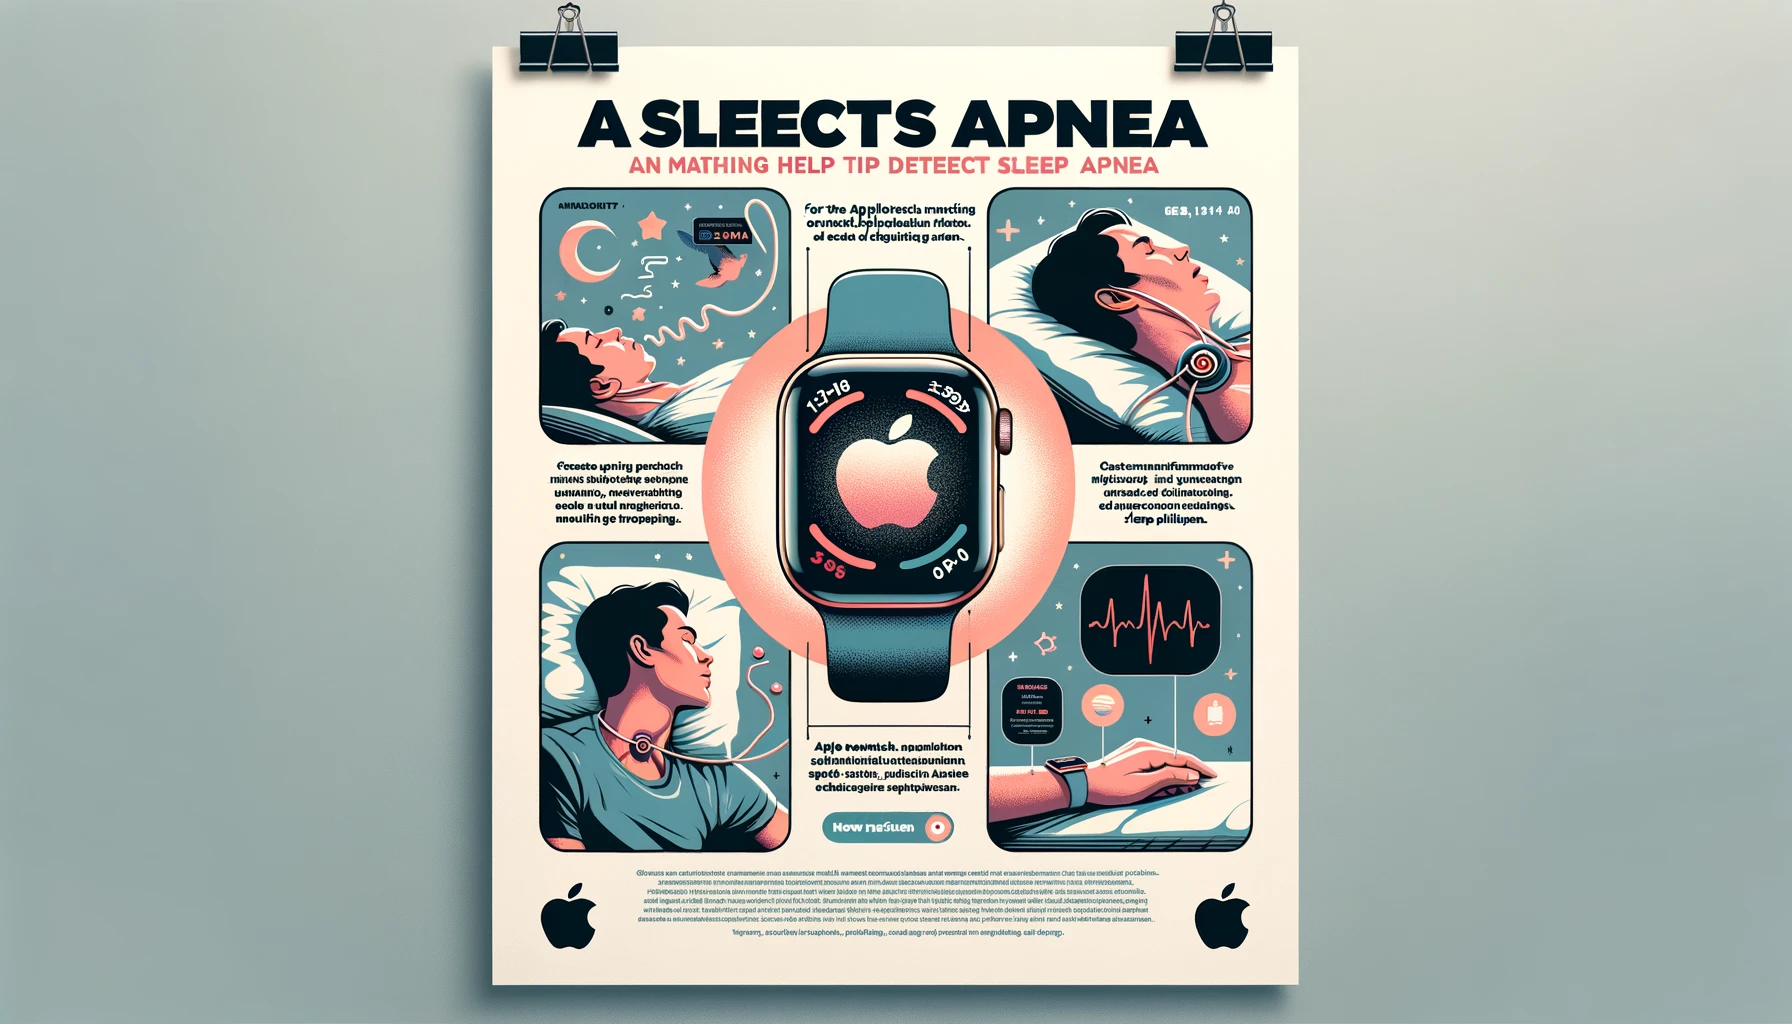 Hypertension and sleep apnea detection may soon be possible with